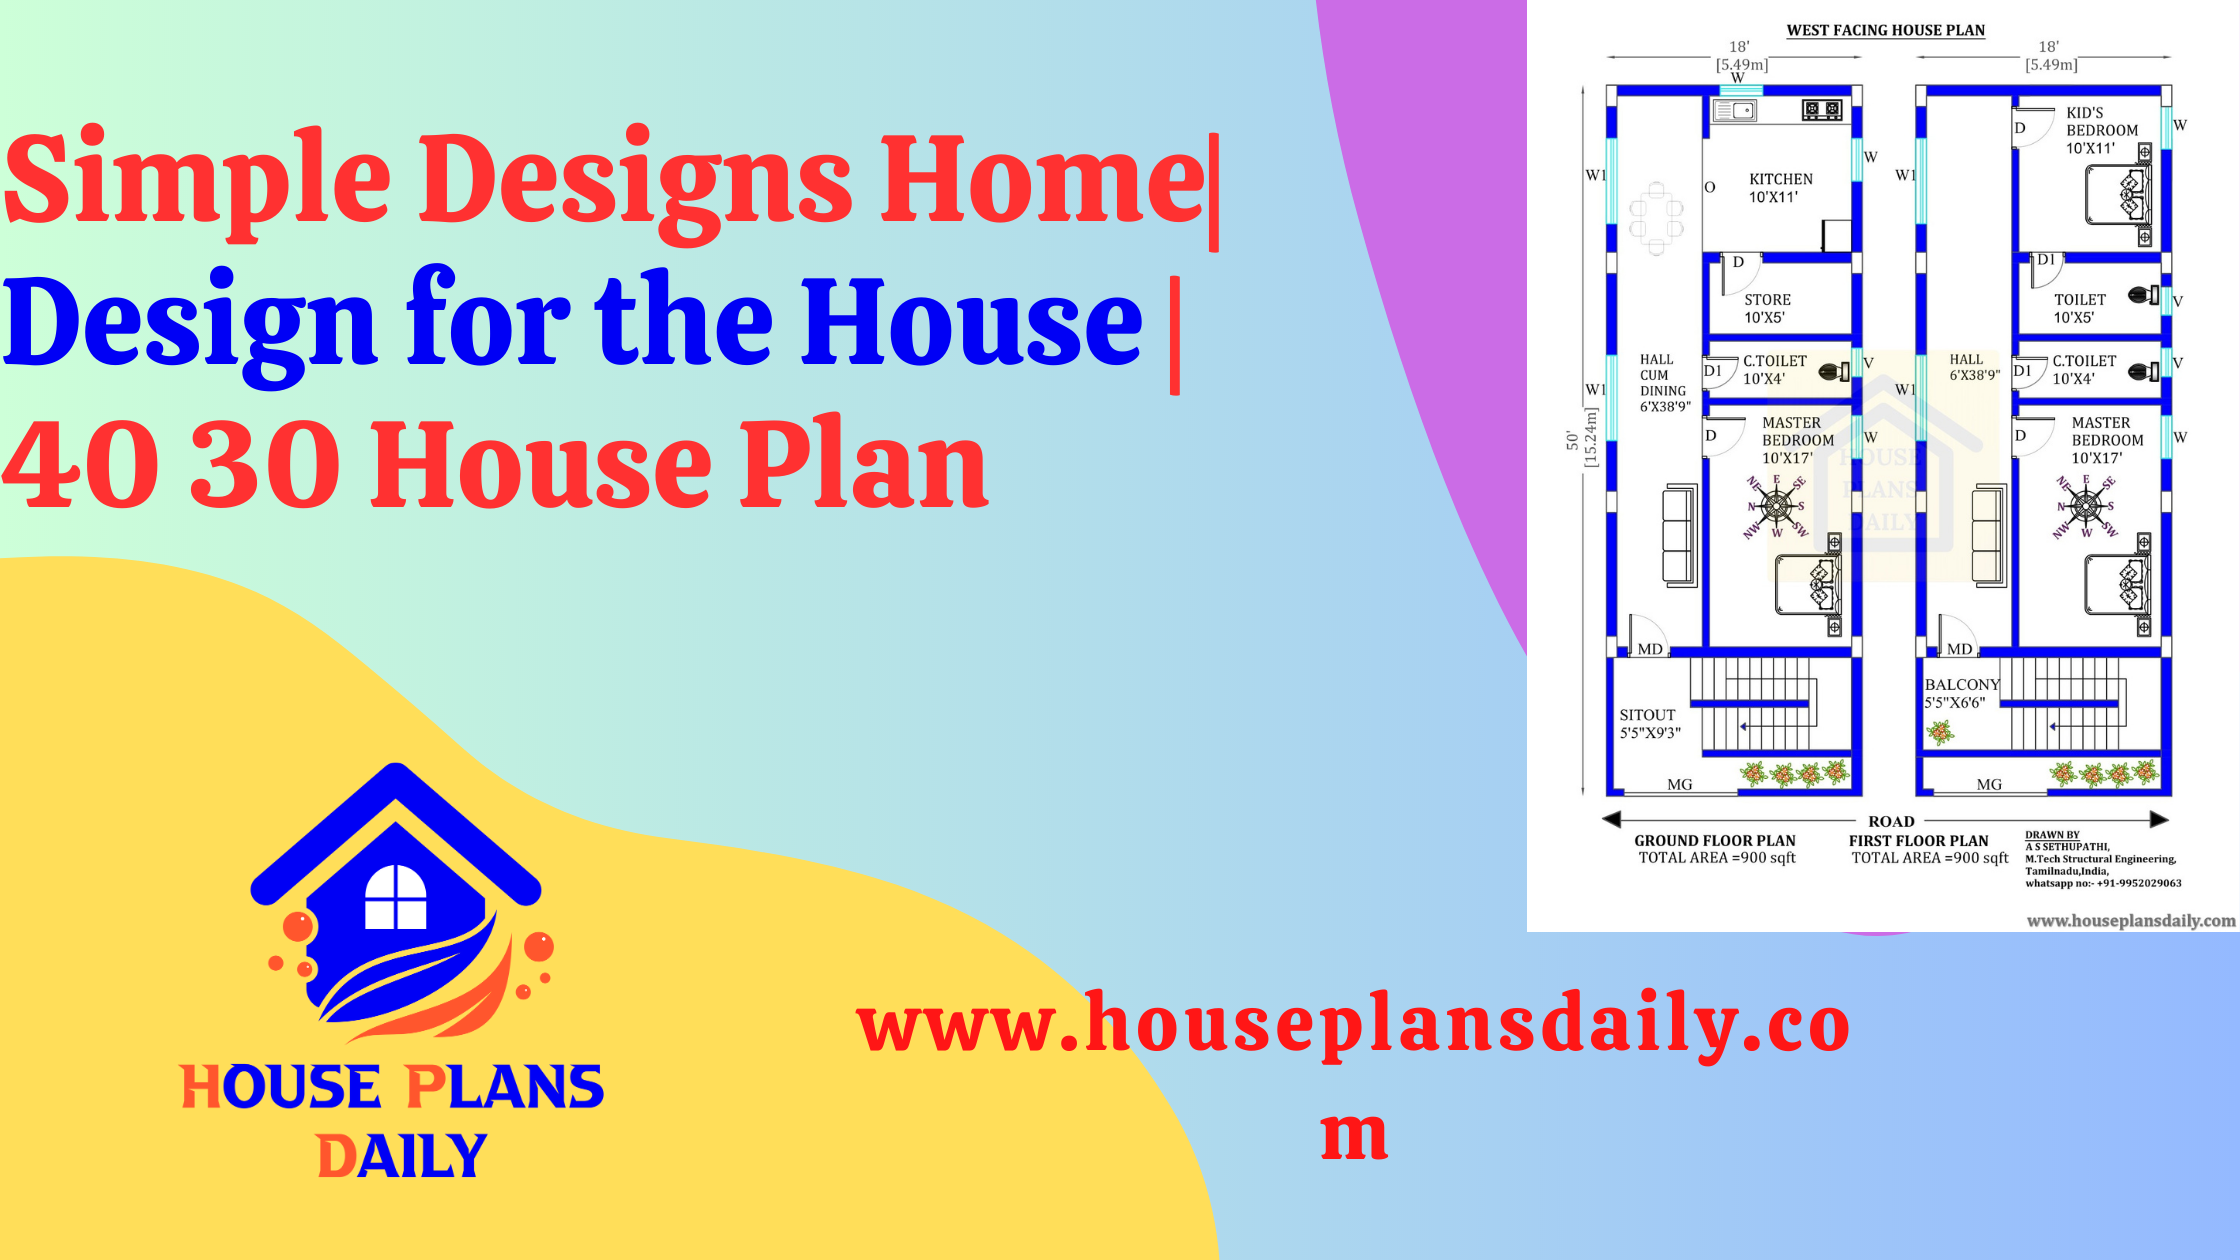 Simple Designs Home| Design for the House | 40 30 House Plan